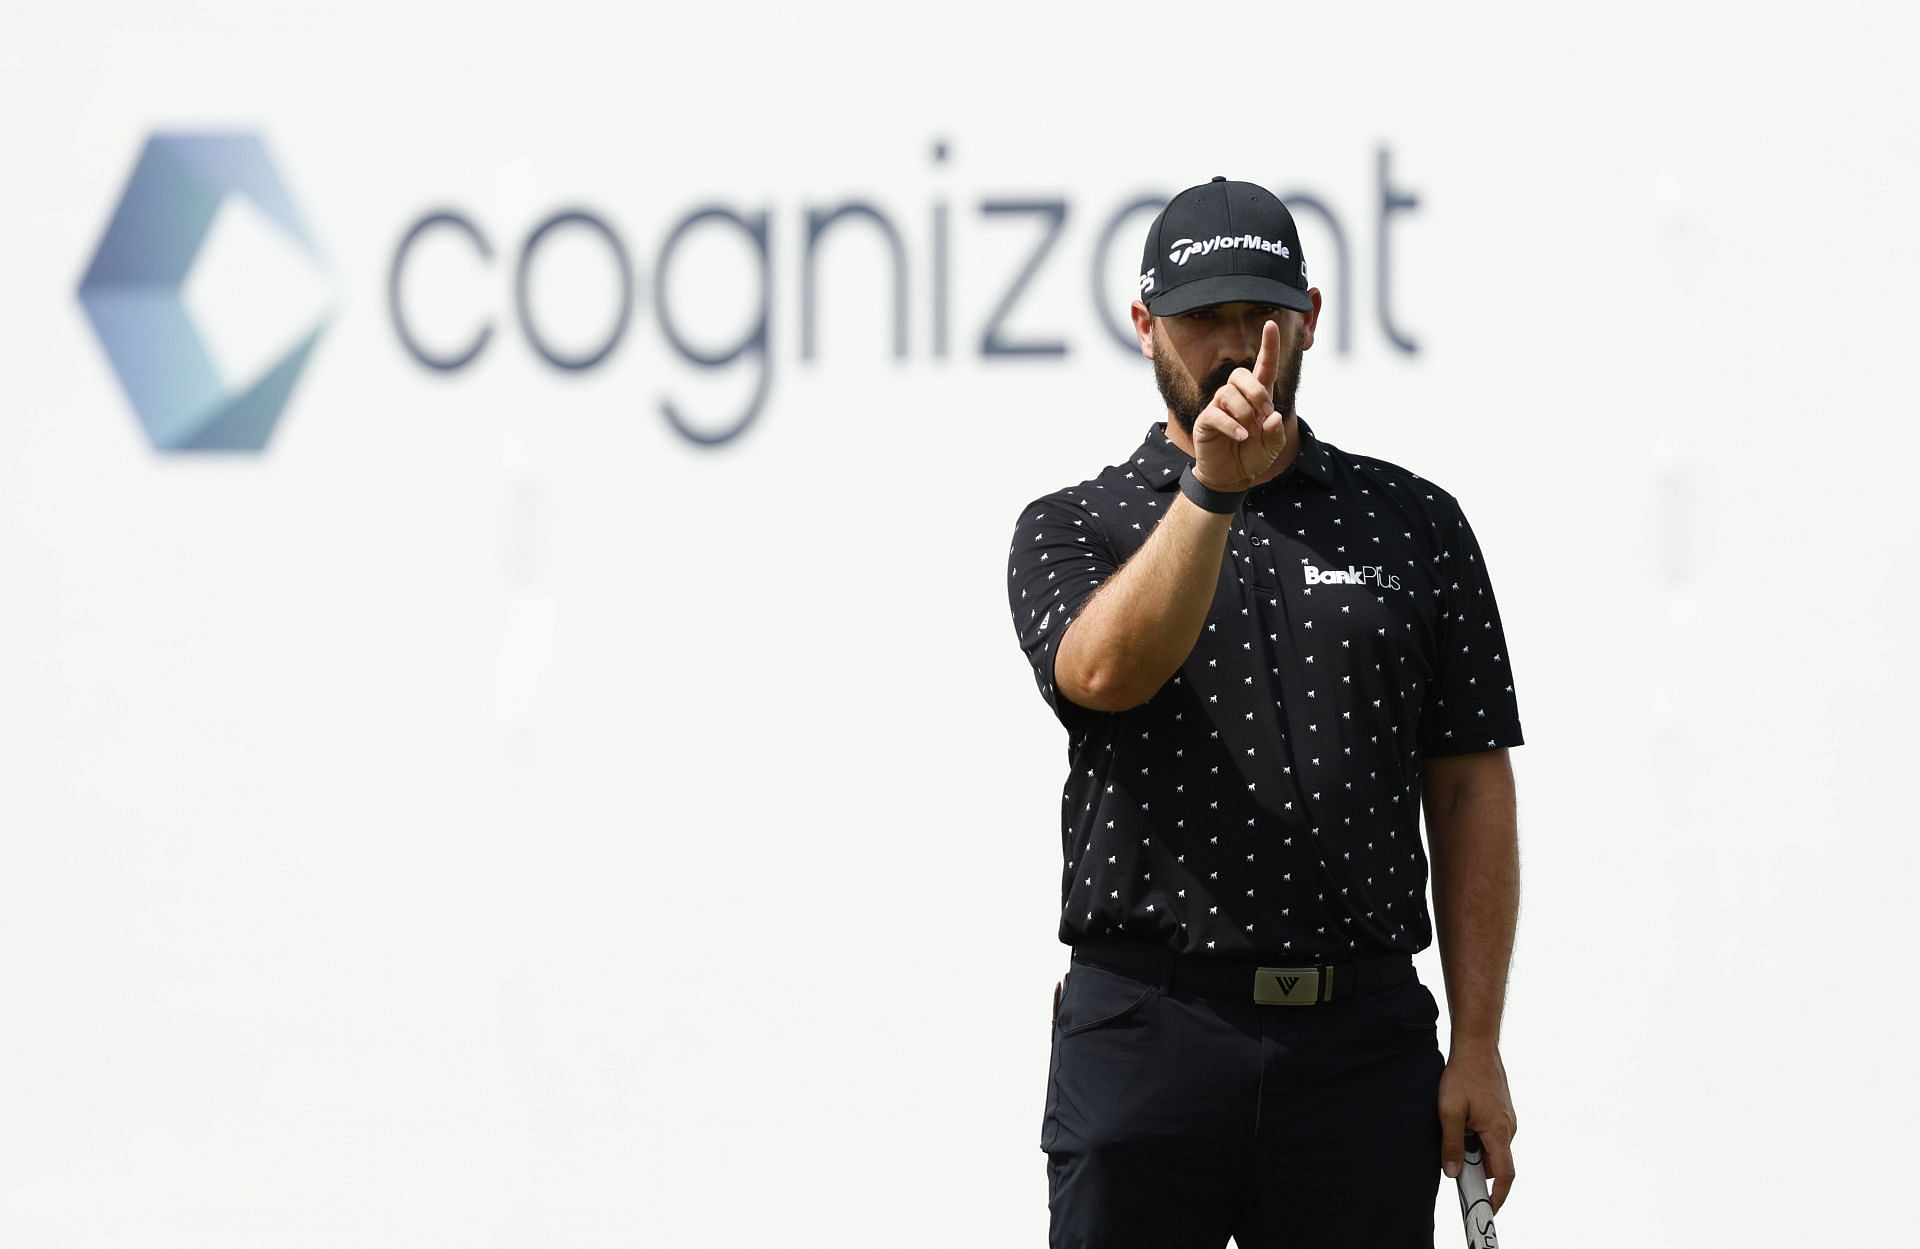 The Cognizant Classic in The Palm Beaches - Round One